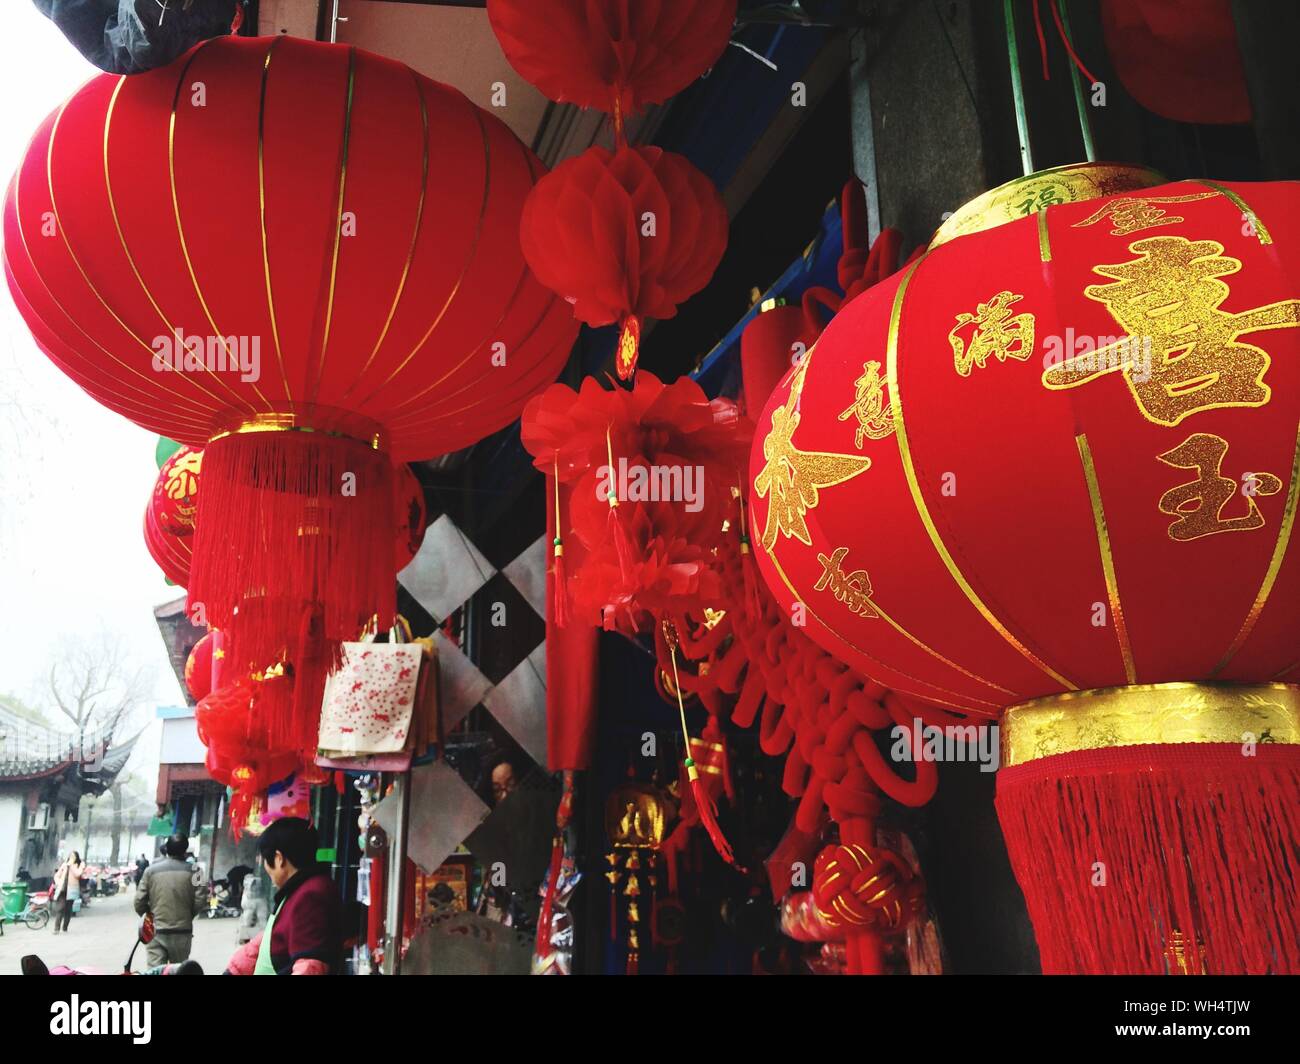 Chinese Lanterns For Sale At Market Stock Photo - Alamy